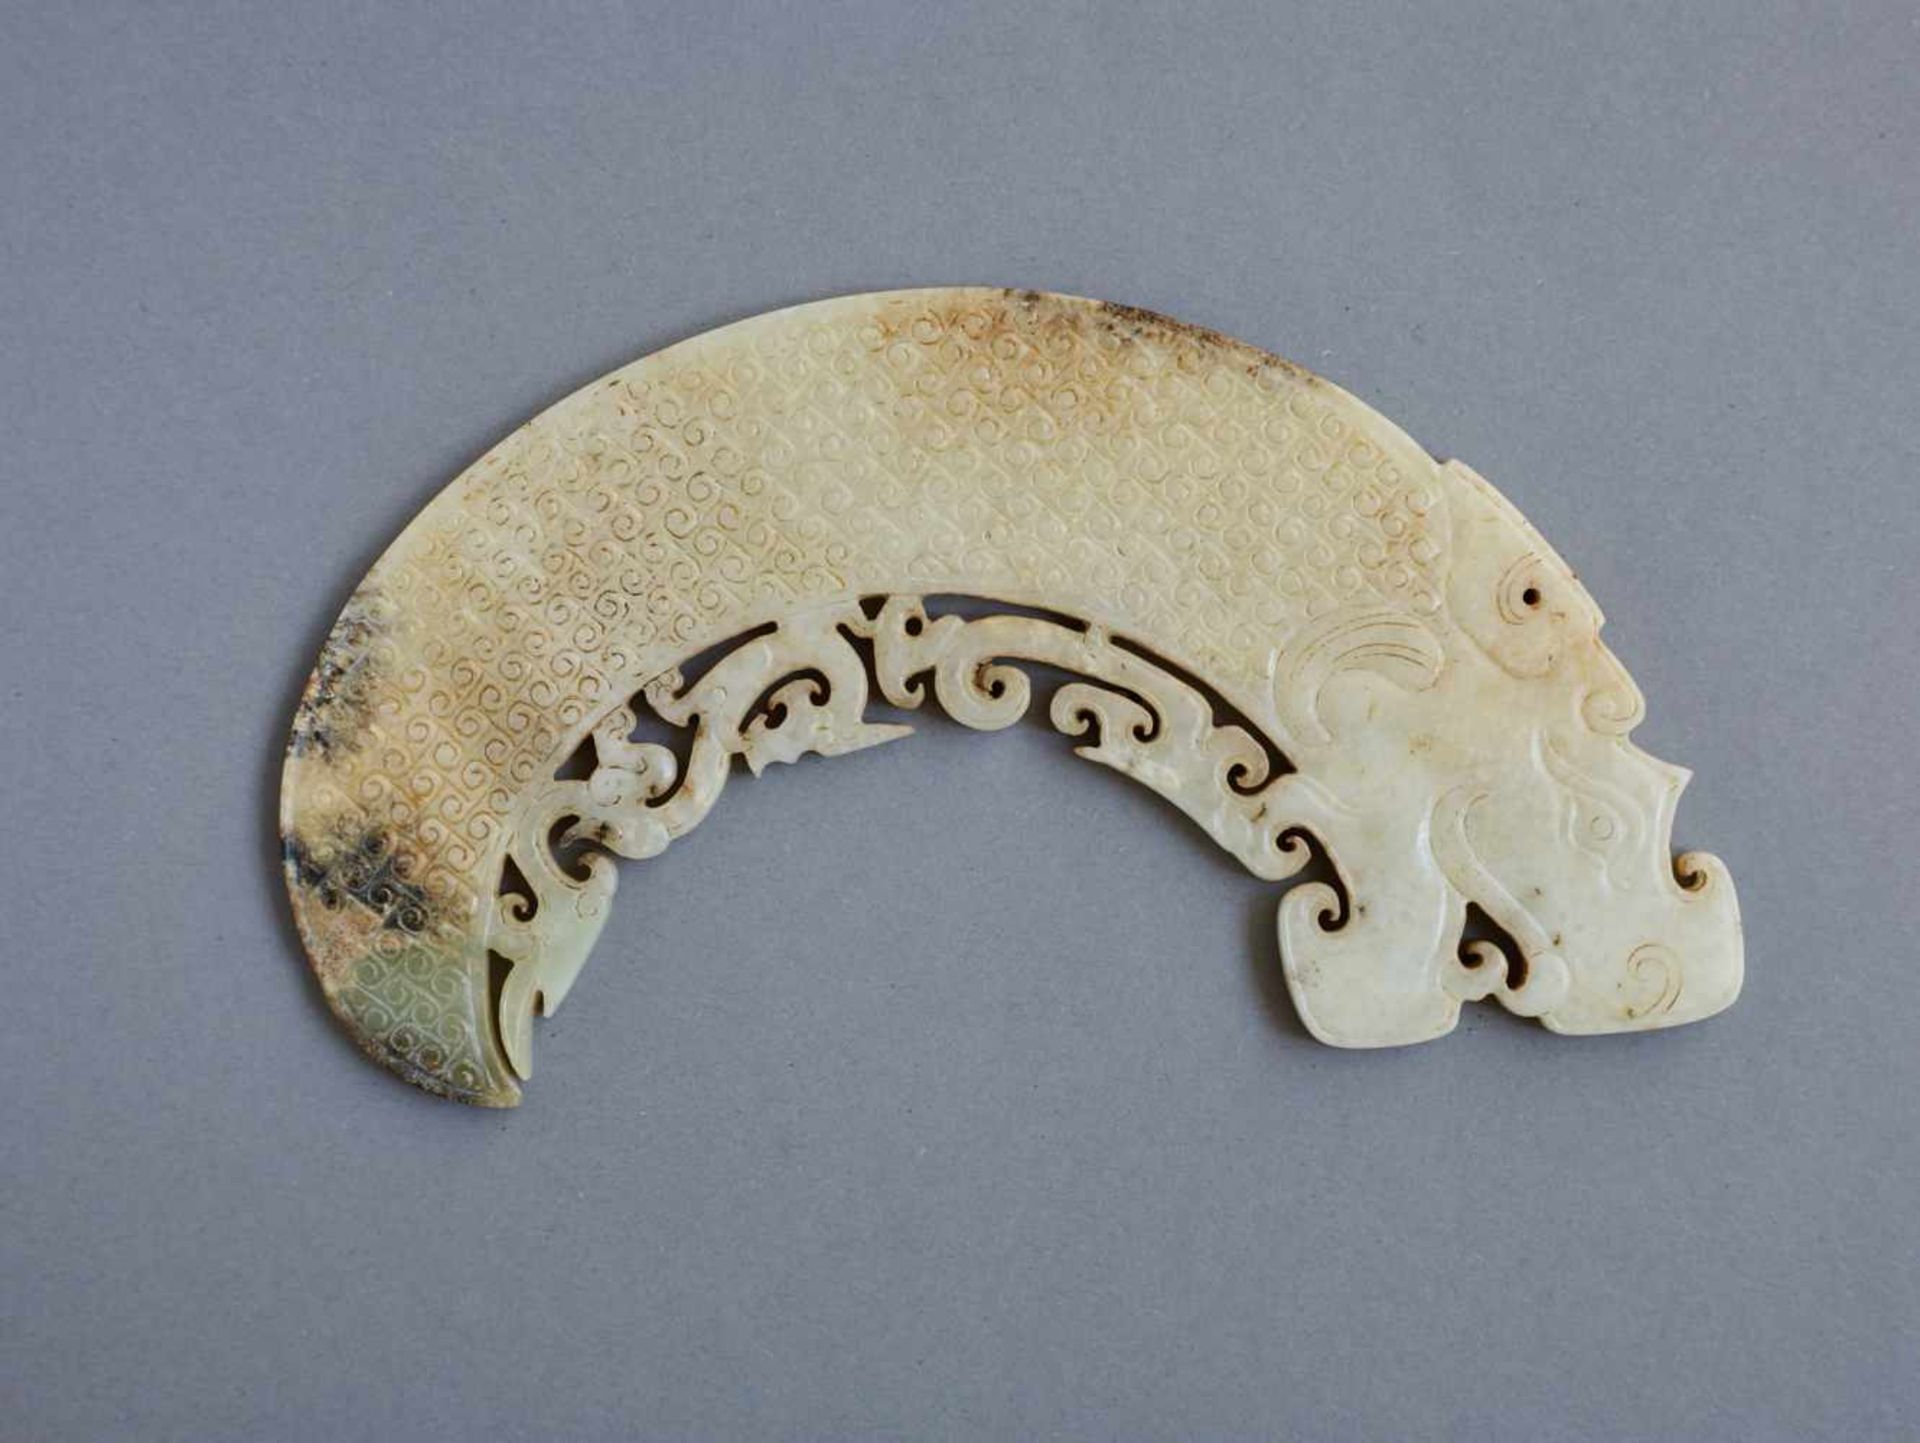 DRAGON-SHAPED ORNAMENT This jade is published in Filippo Salviati 4000 YEARS OF CHINESE ARCHAIC